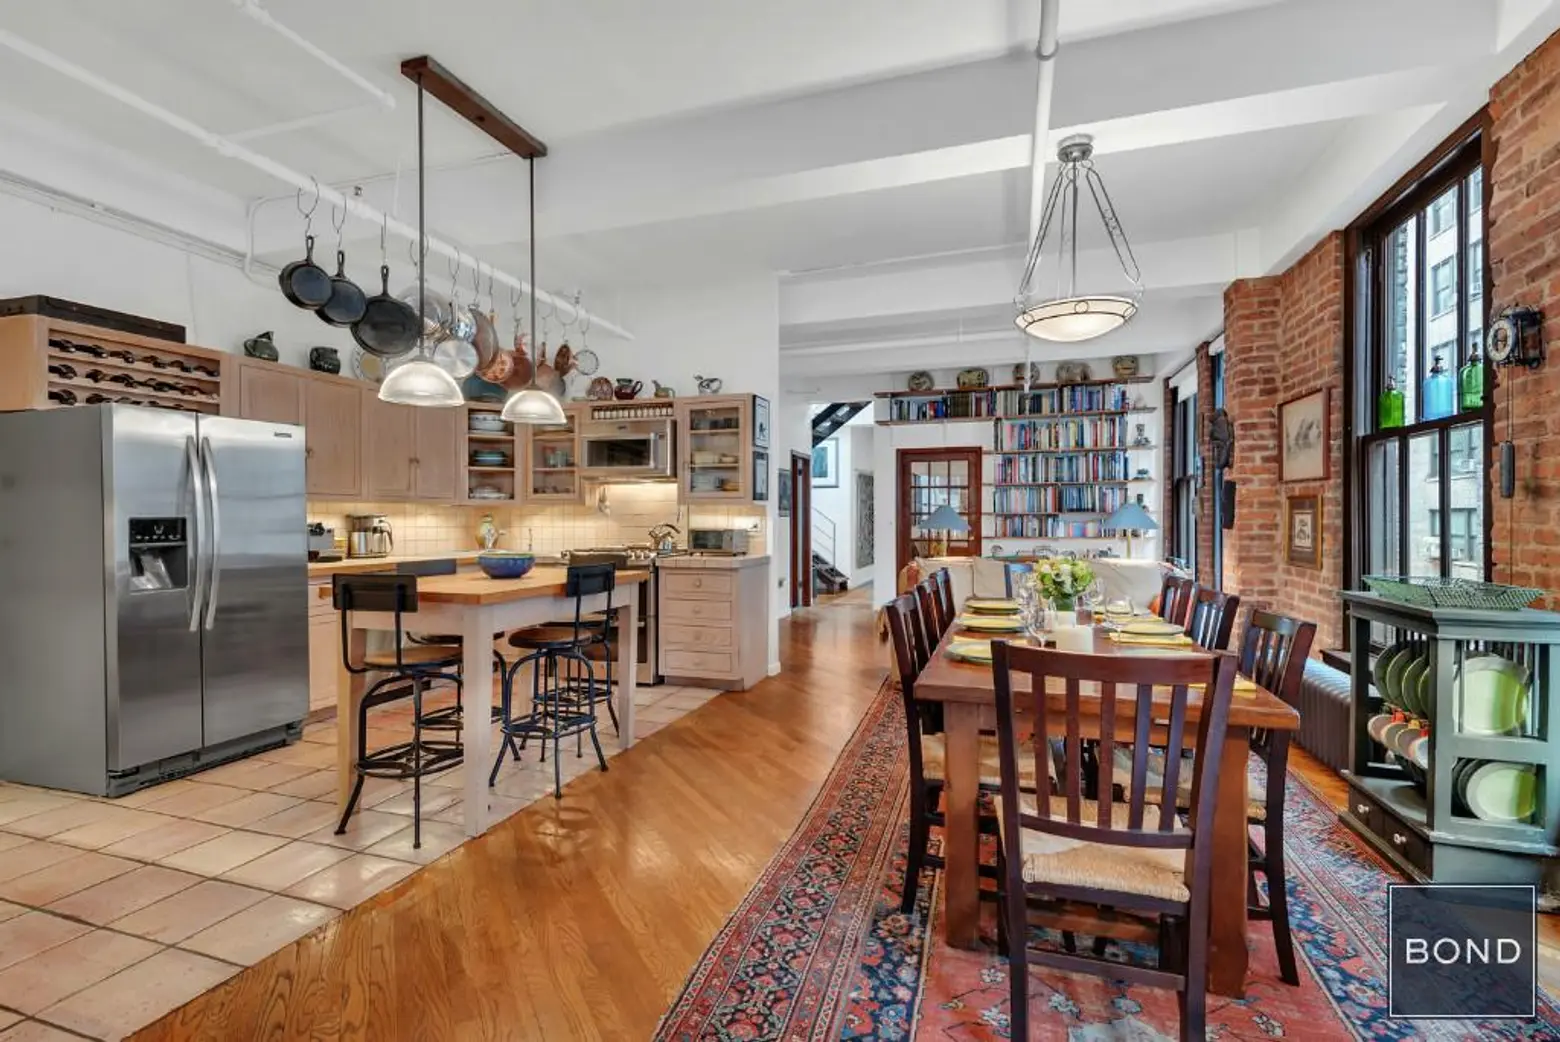 This $2.45M Chelsea loft has authenticity, style and a magical roof garden